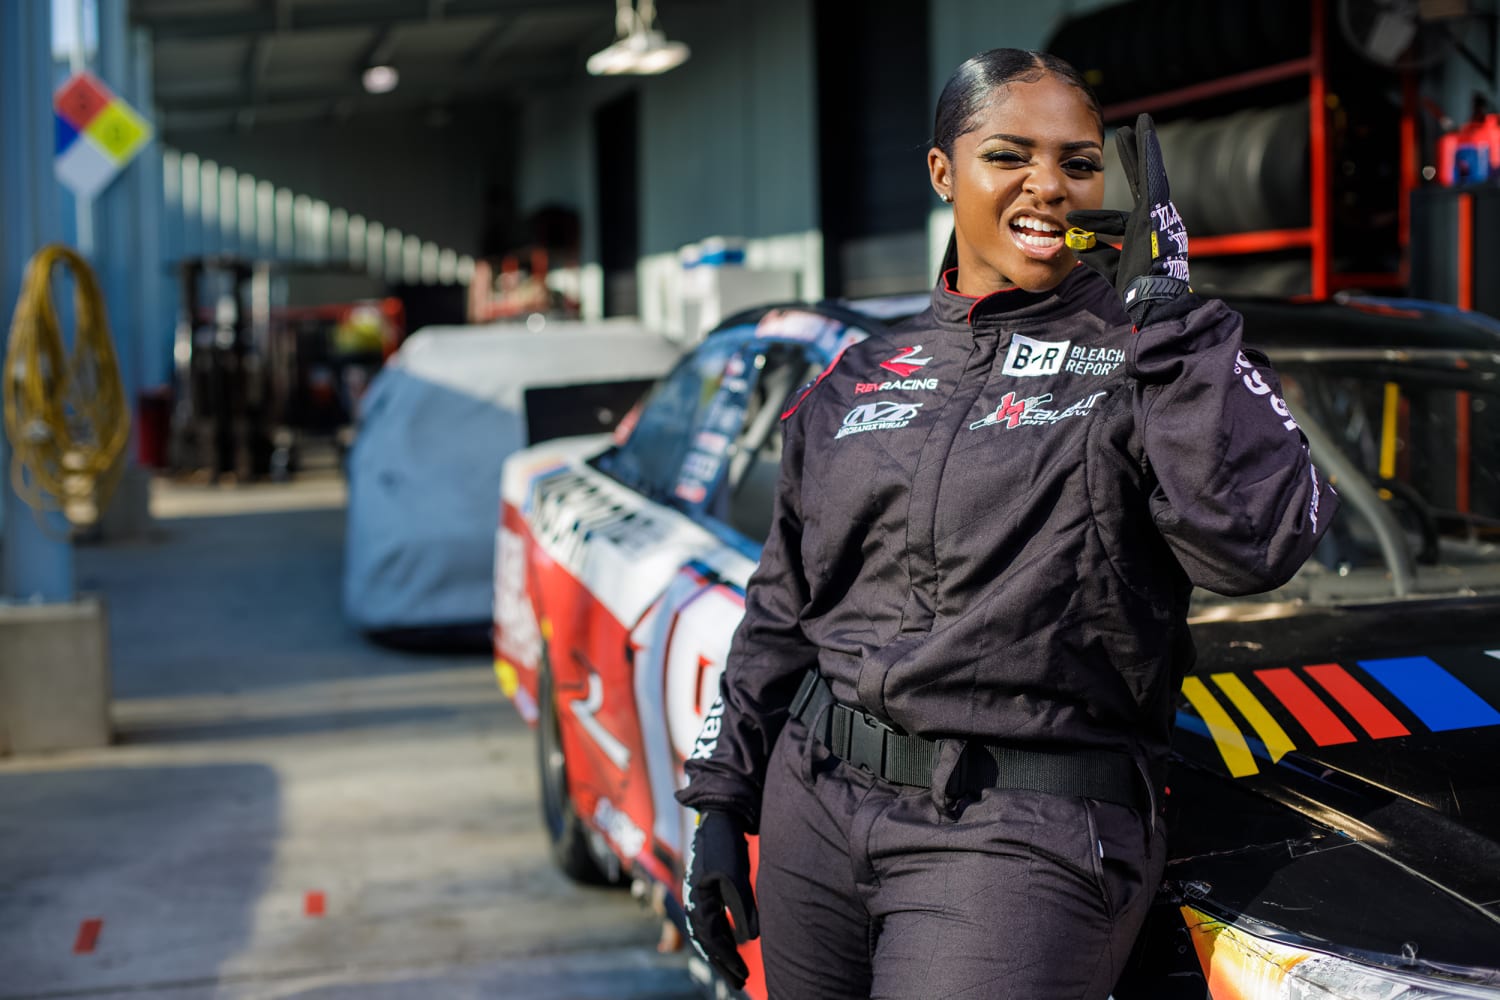 The 27-year-old, who made history as NASCAR's first Black woman pi...